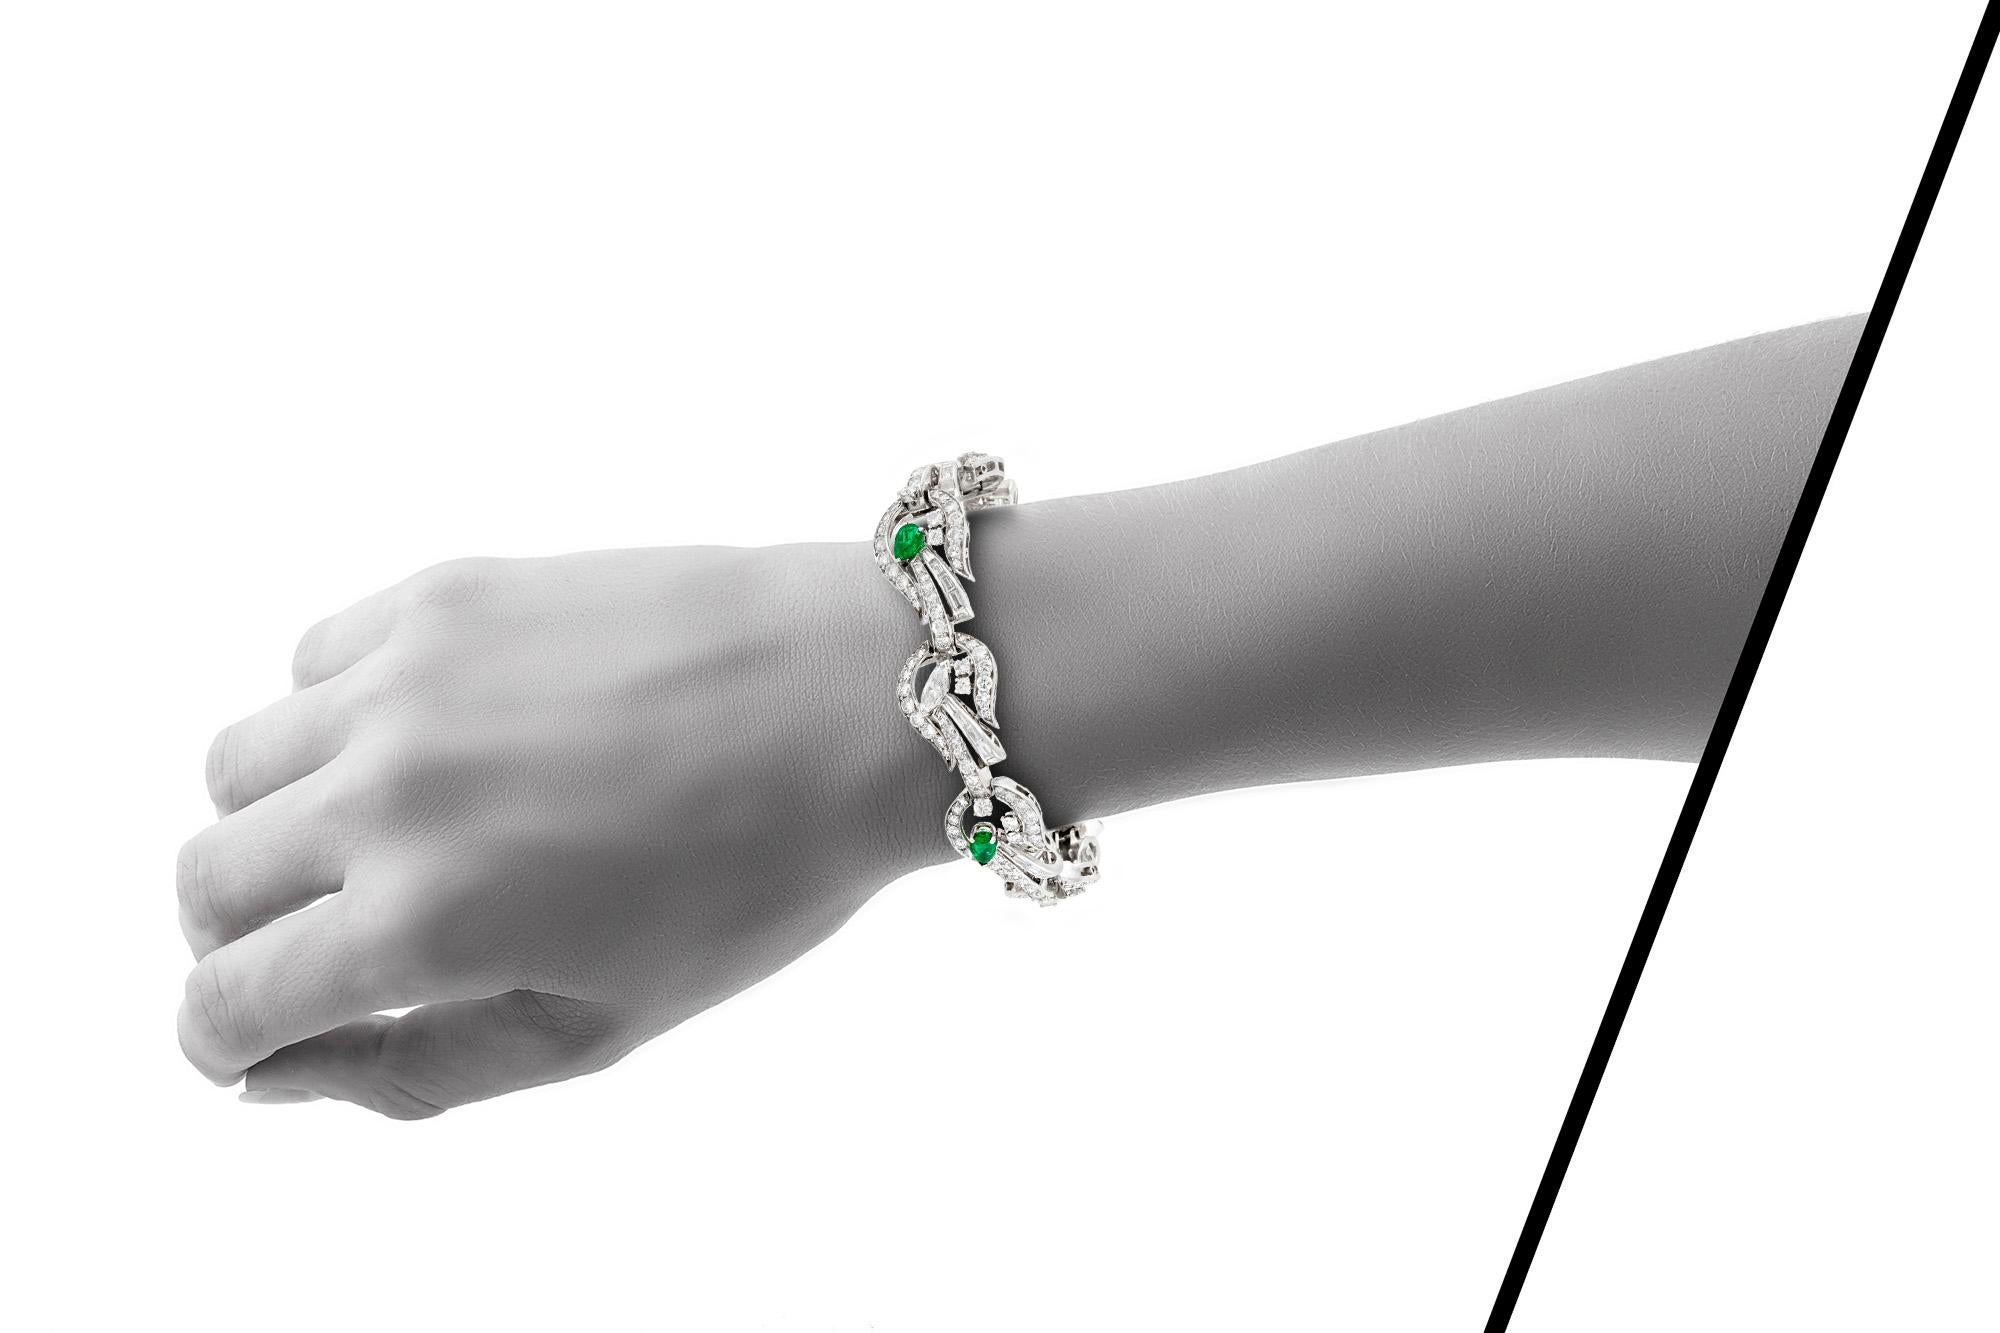 Bracelet, finely crafted in platinum with diamonds weighing approximately a total of 10.00 carat and emeralds weighing approximately a total of 2.00 carat. Circa 1950's.